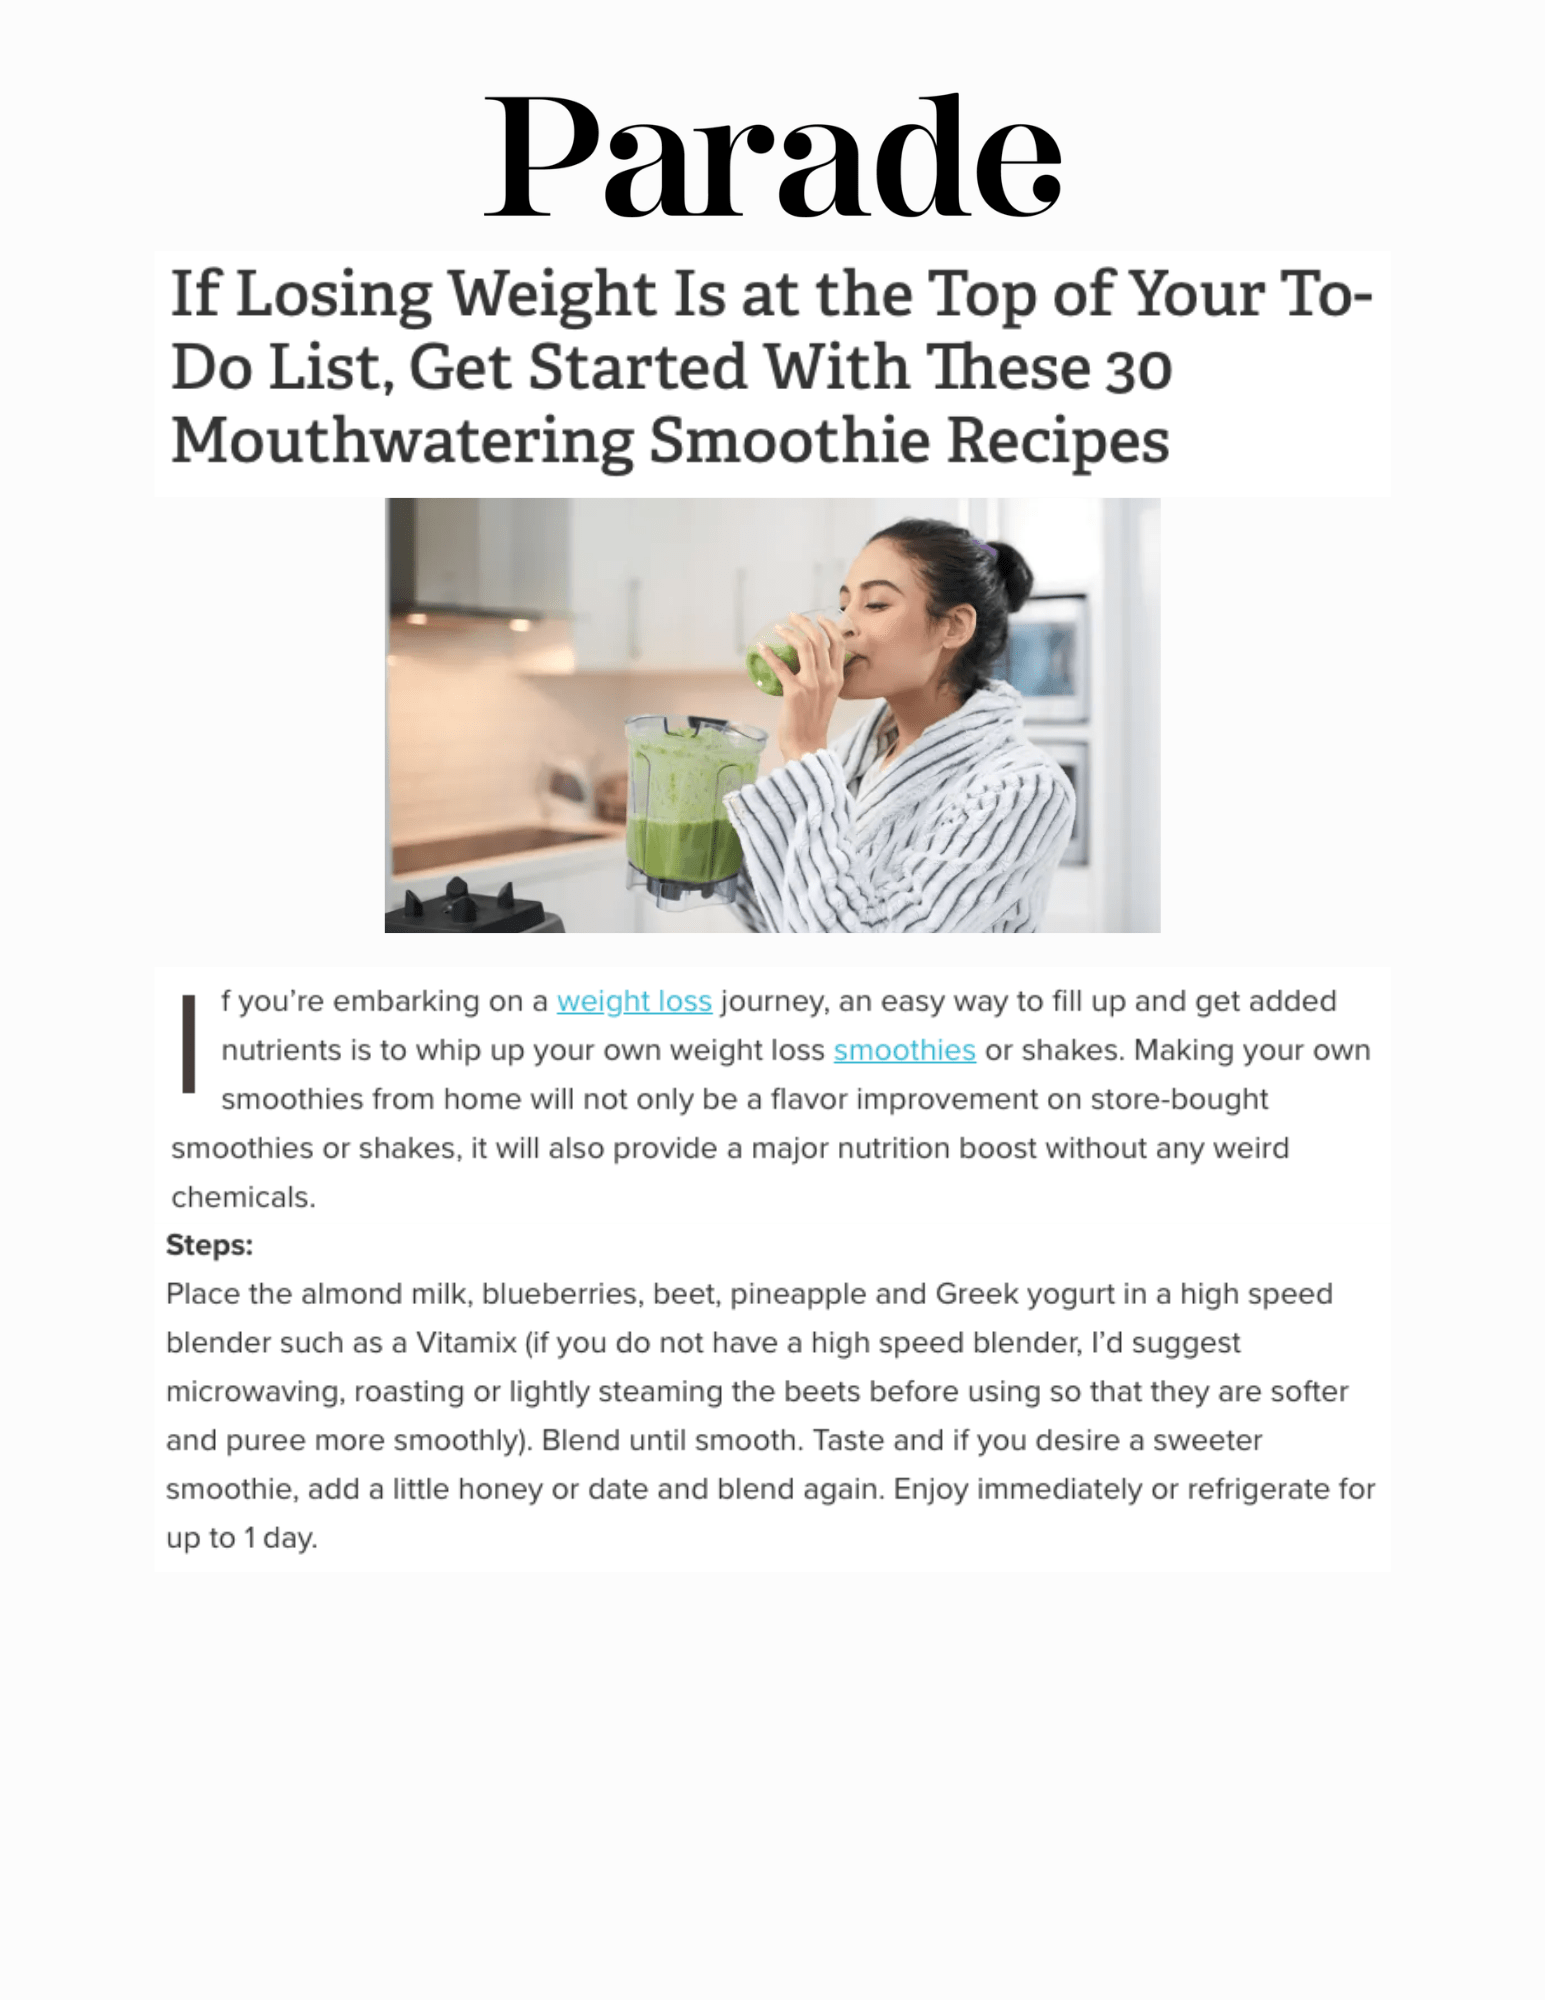 If Losing Weight Is at the Top of Your To-Do List, Get Started With These 30 Mouthwatering Smoothie Recipes
Featured Brands include:Vitamix

Read More